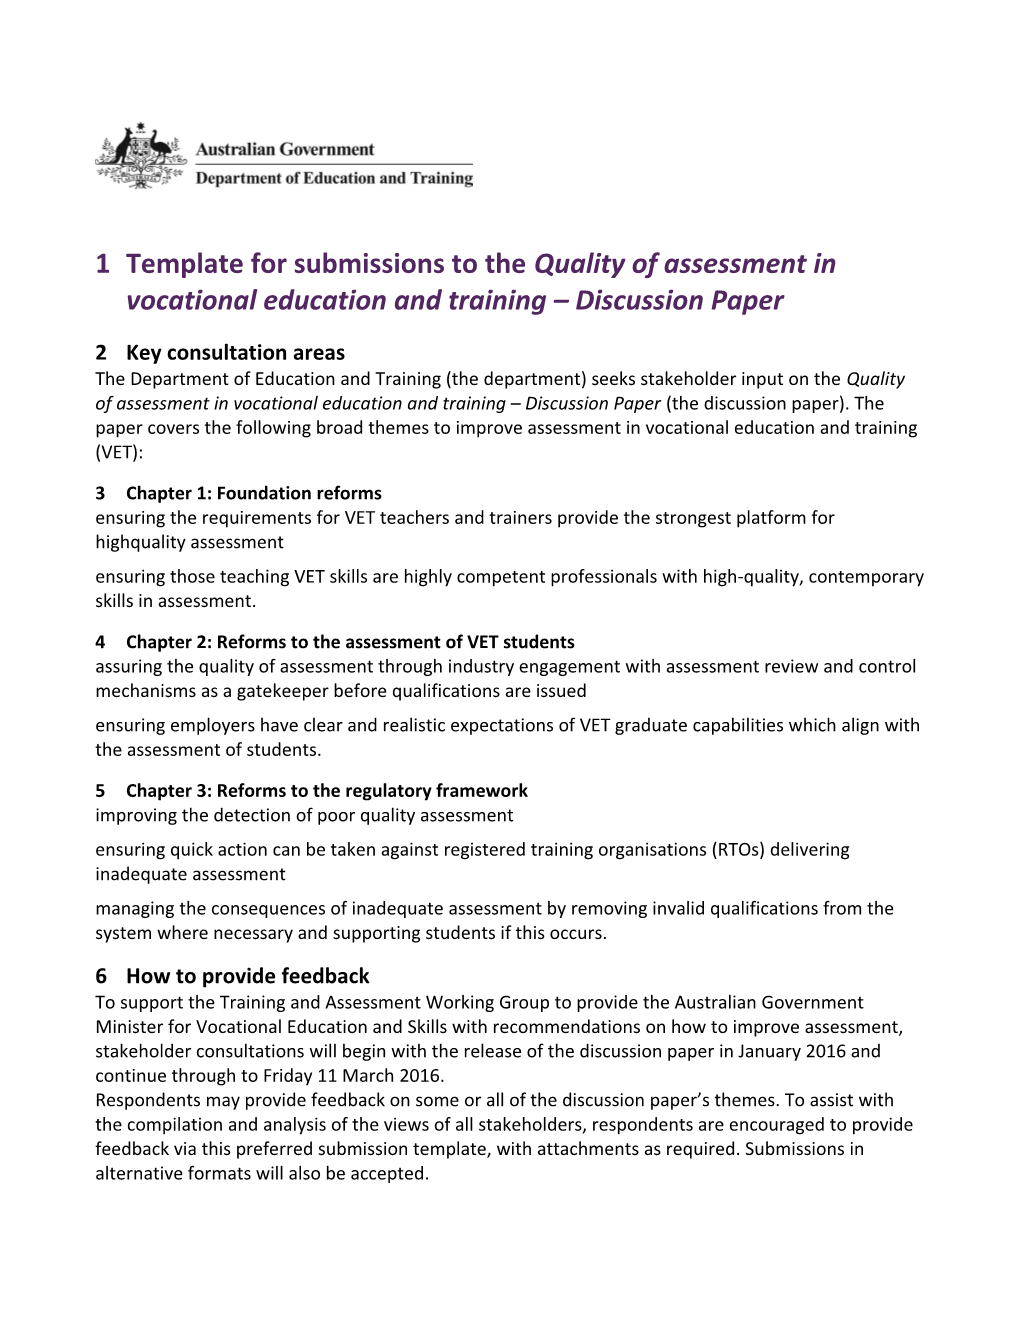 Template for Submissions to the Quality of Assessment in Vocational Education and Training